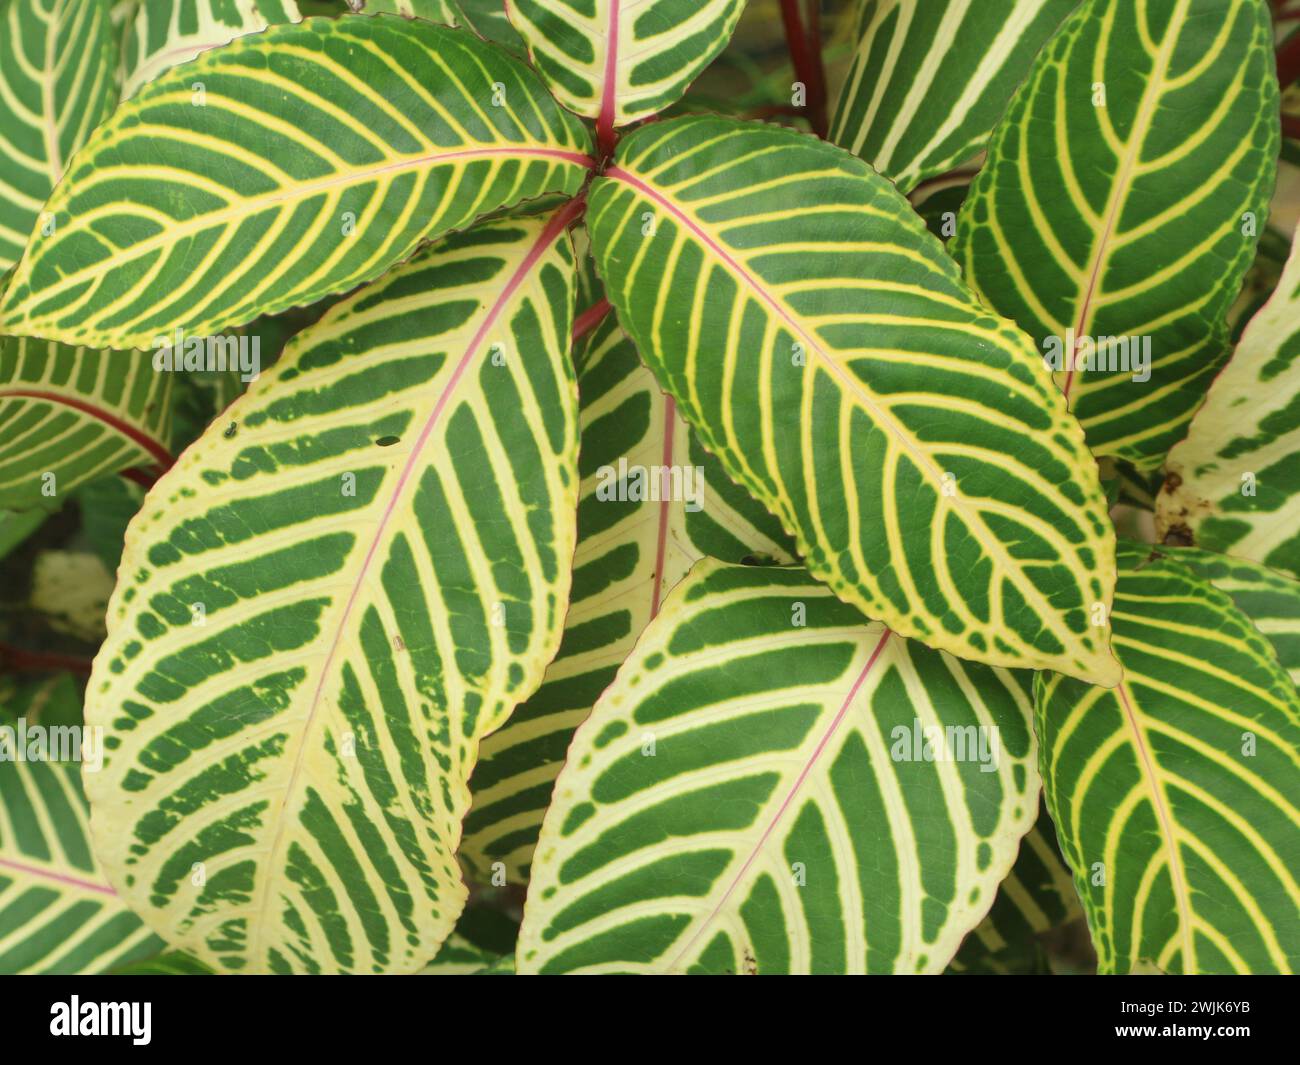 The aglaonema ornamental plant has red bone patterned leaves Stock Photo